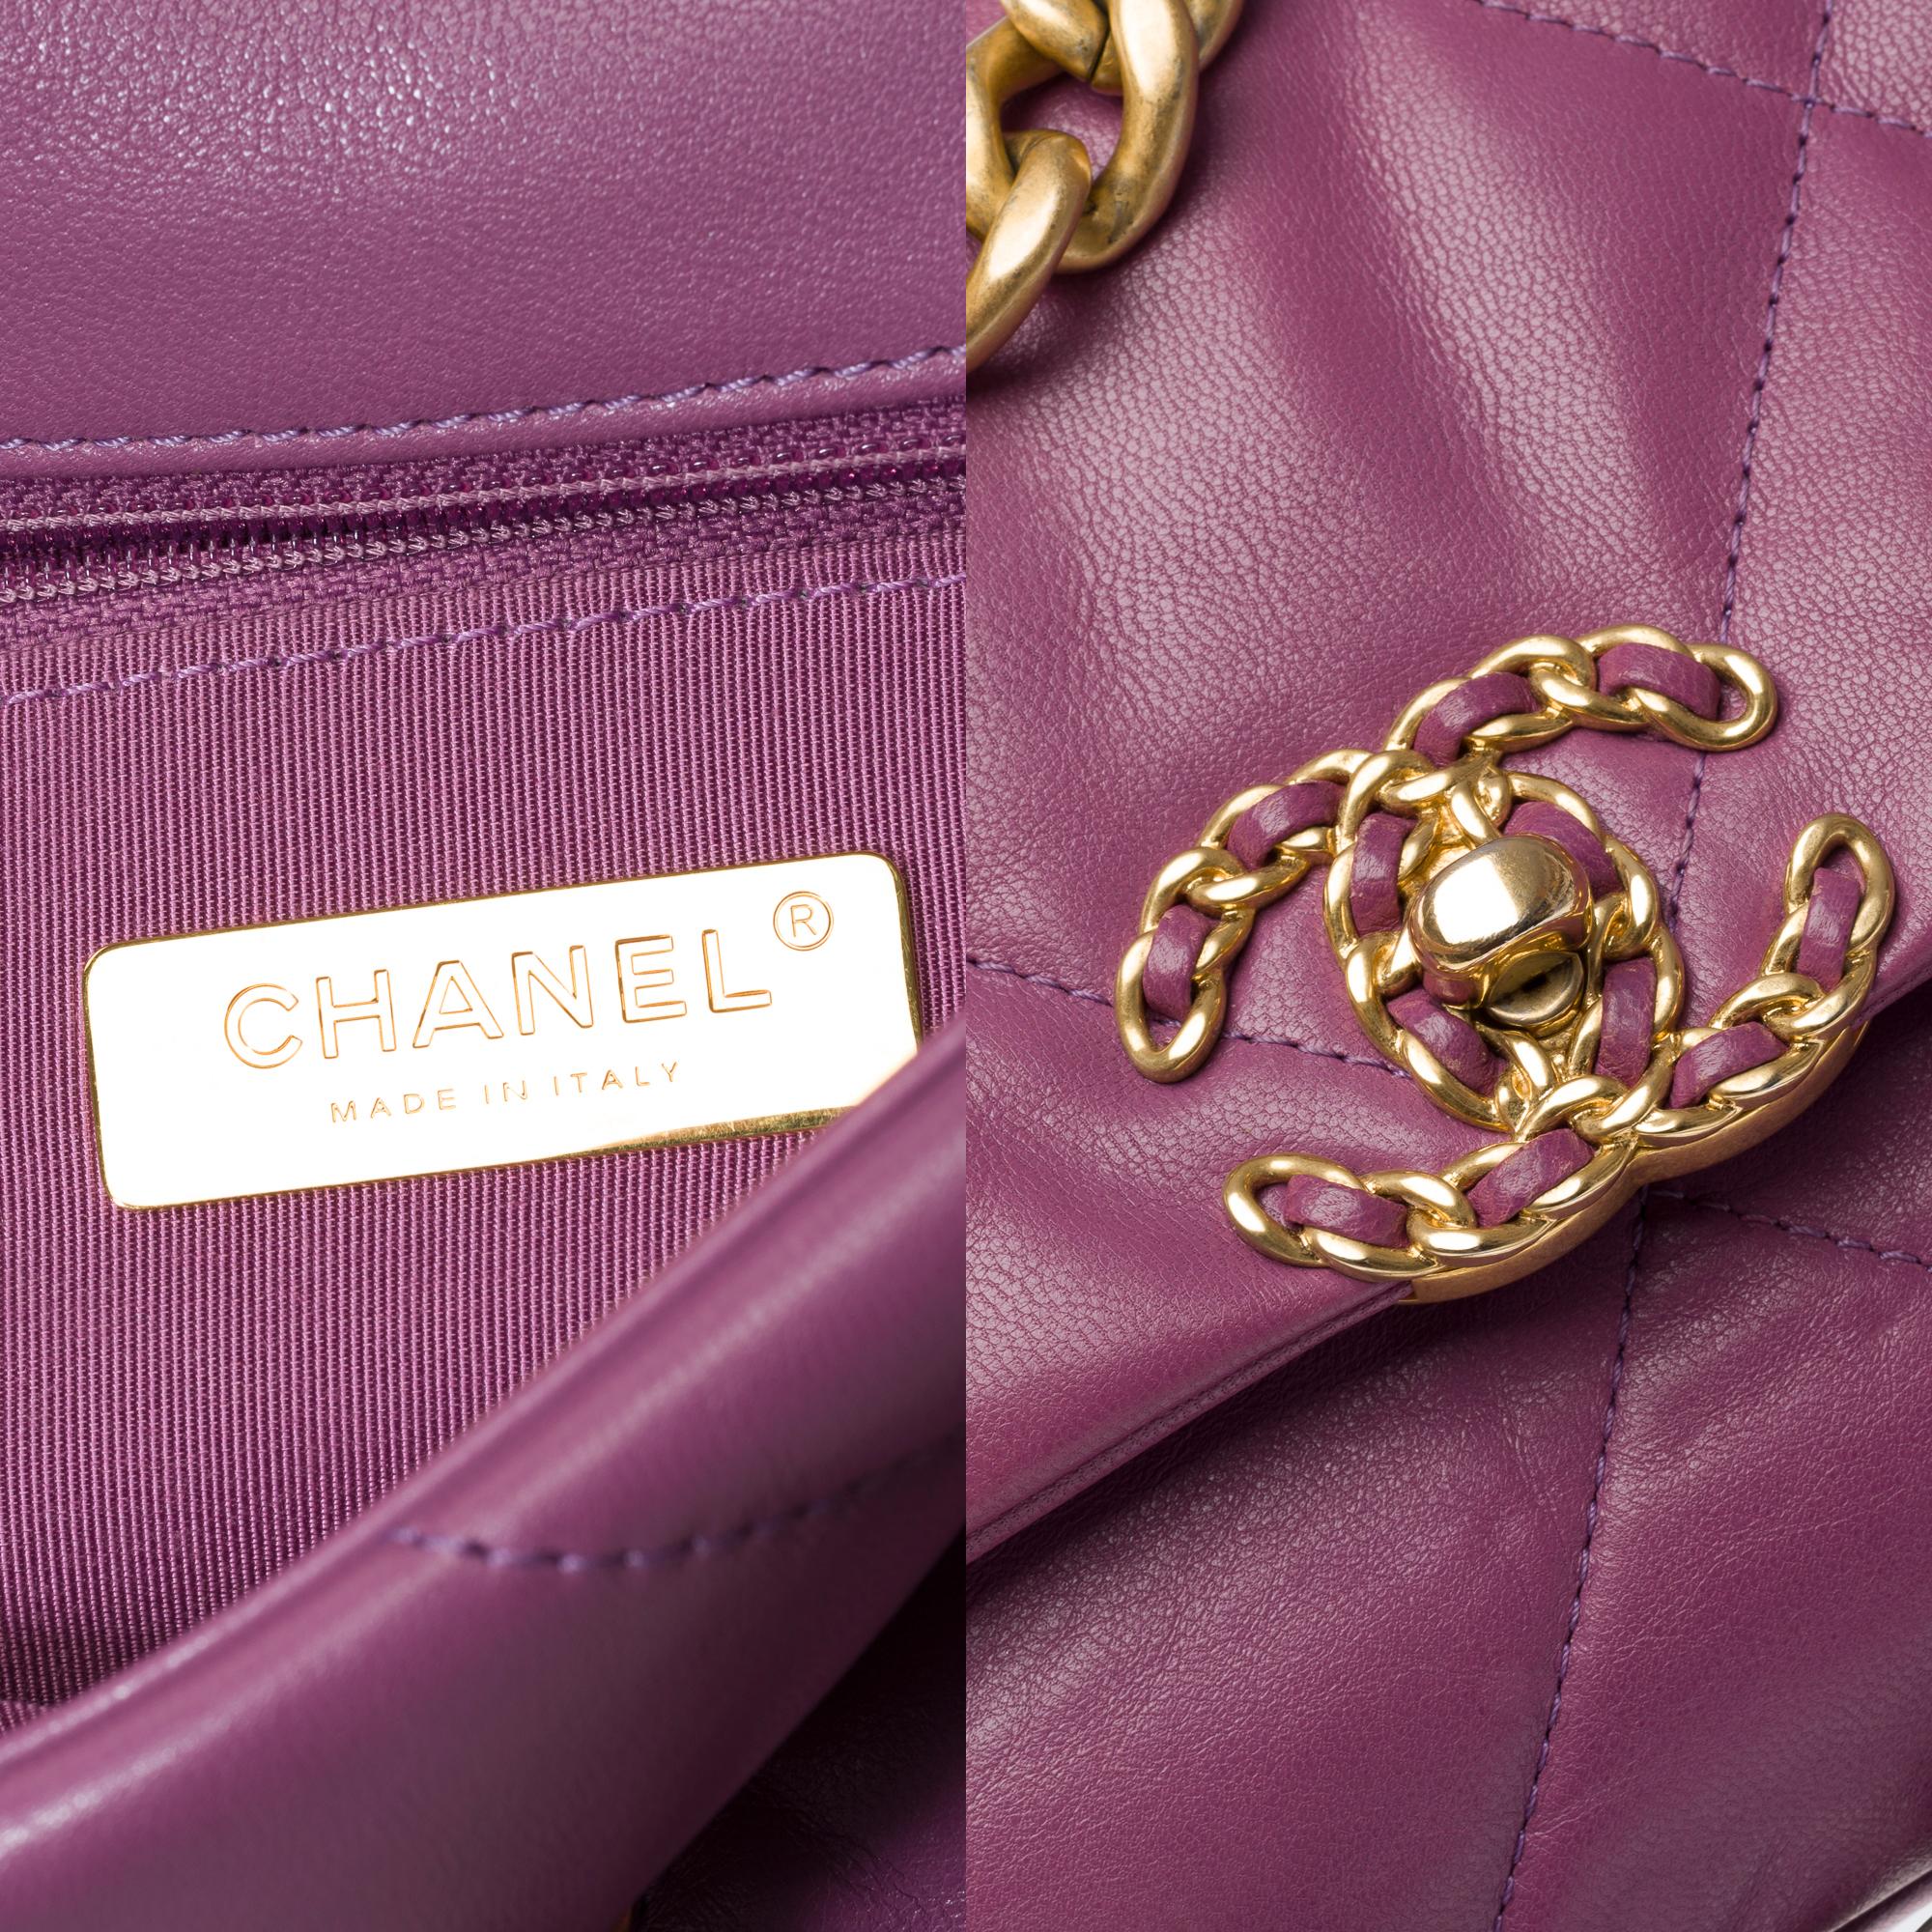 Stunning Chanel 19 shoulder bag in purple quilted leather , Matt gold and SHW For Sale 3